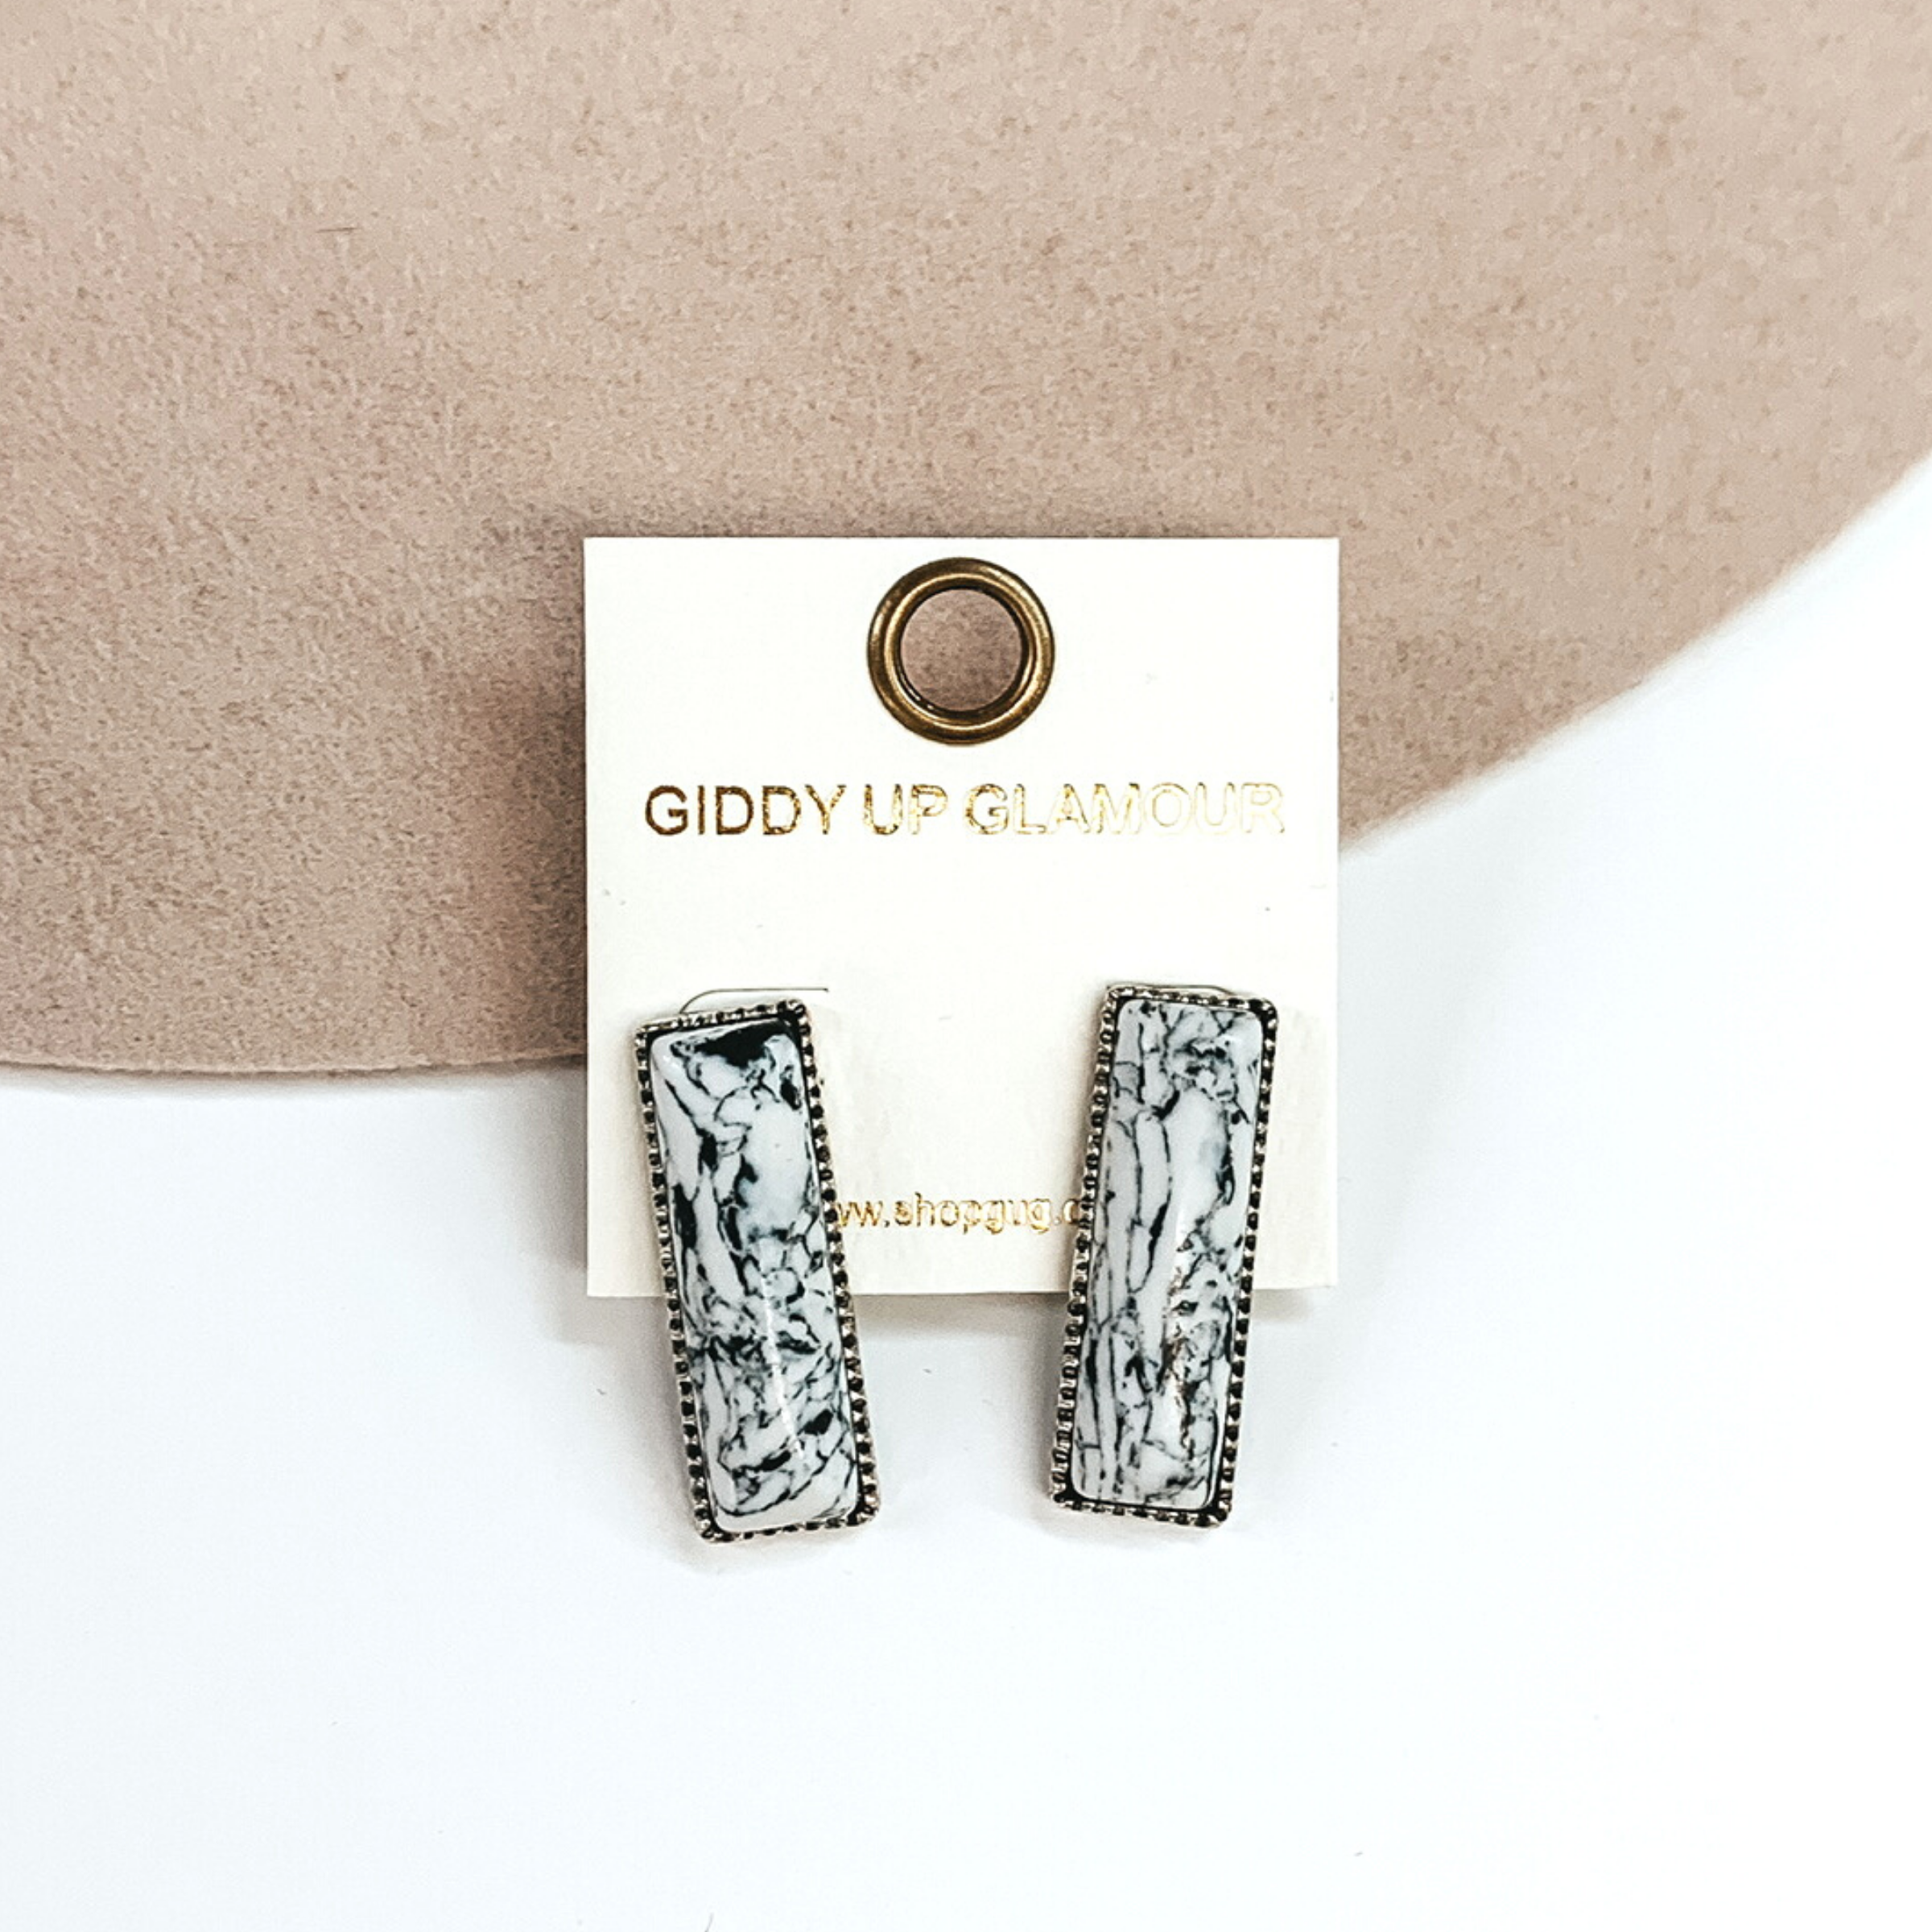 Silver rectangle earrings with a white rectangle stone. These earrings are pictured on a white and beige background. 